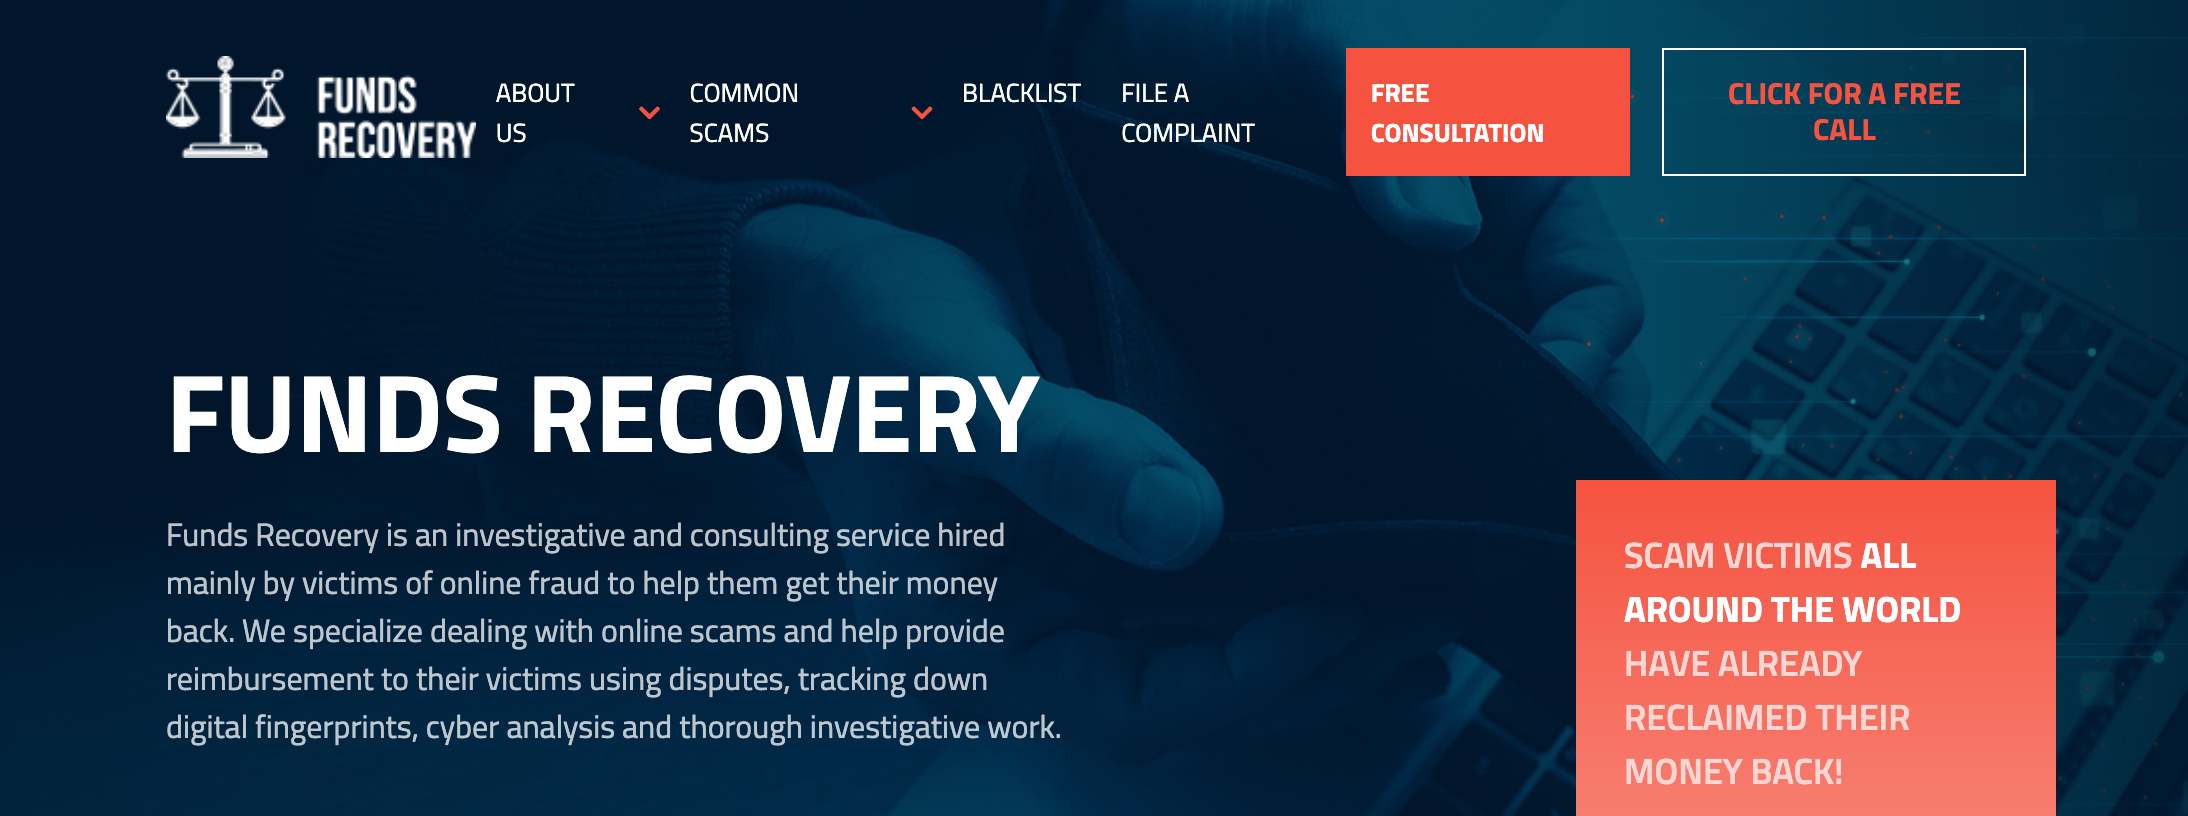 How can I recover money from a scammer?